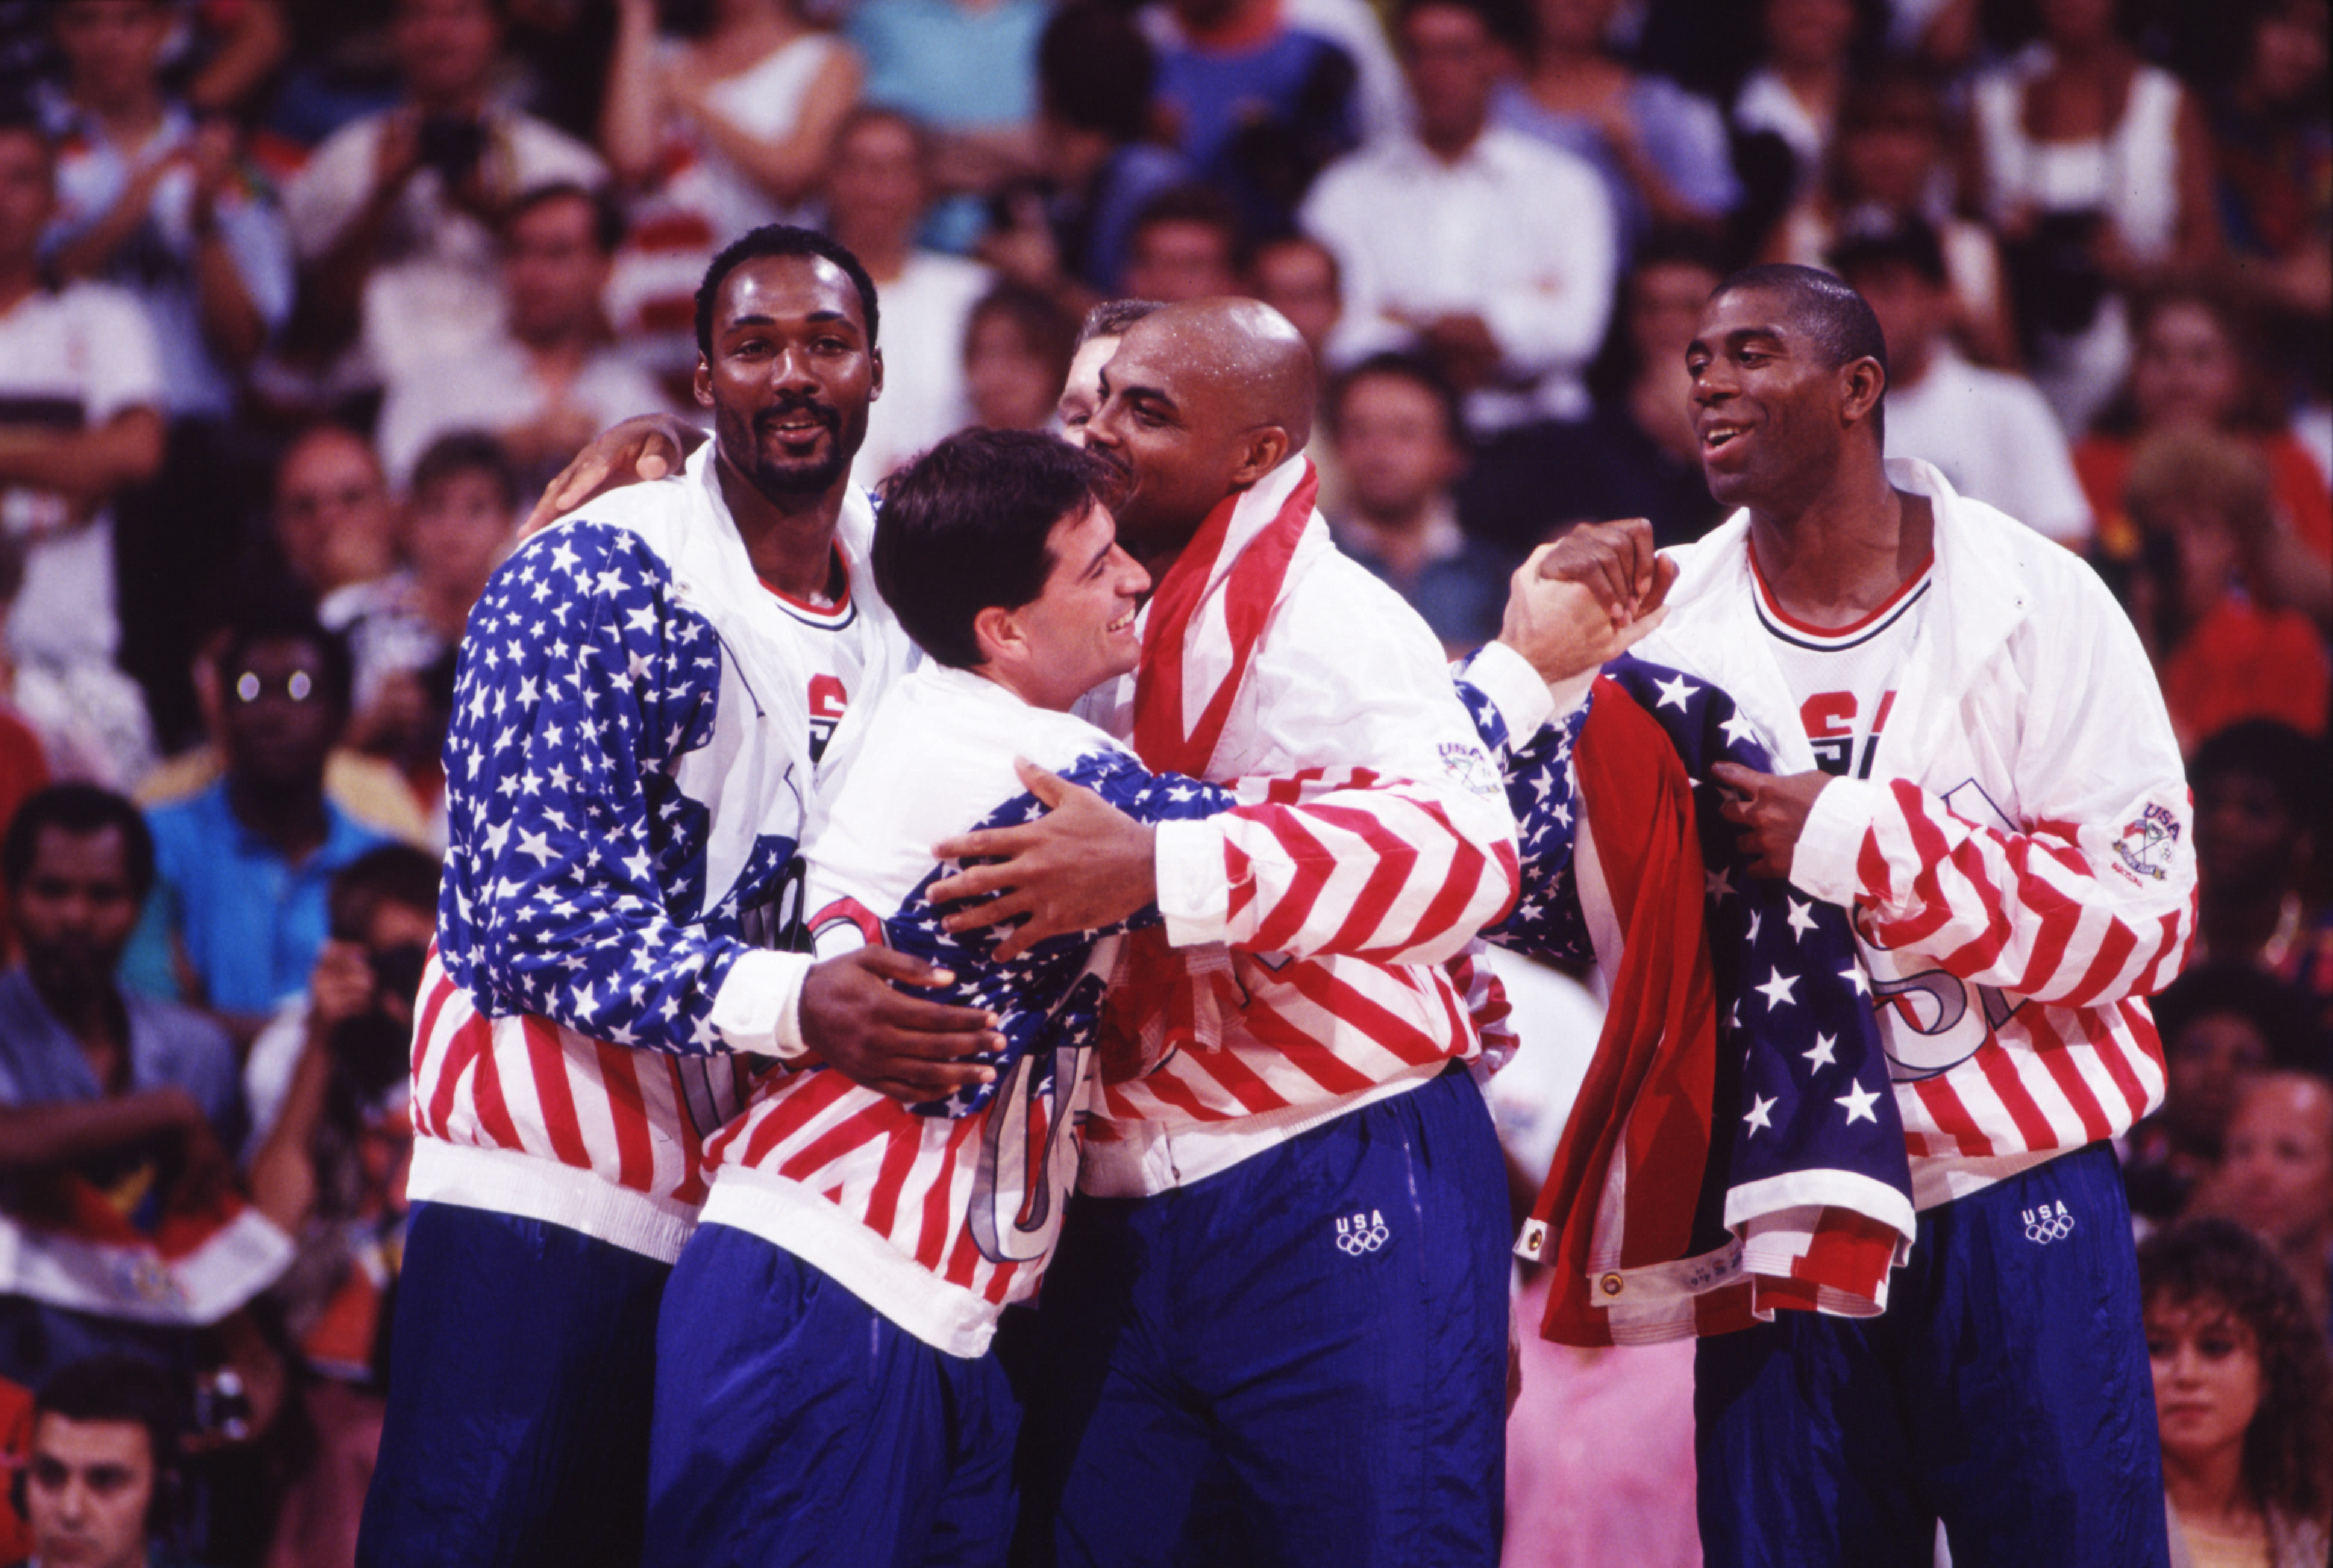 Charles Barkley and John Stockton embrace as the Dream Team prepares to receive gold medals at the 1992 Olympic Games in Barcelona